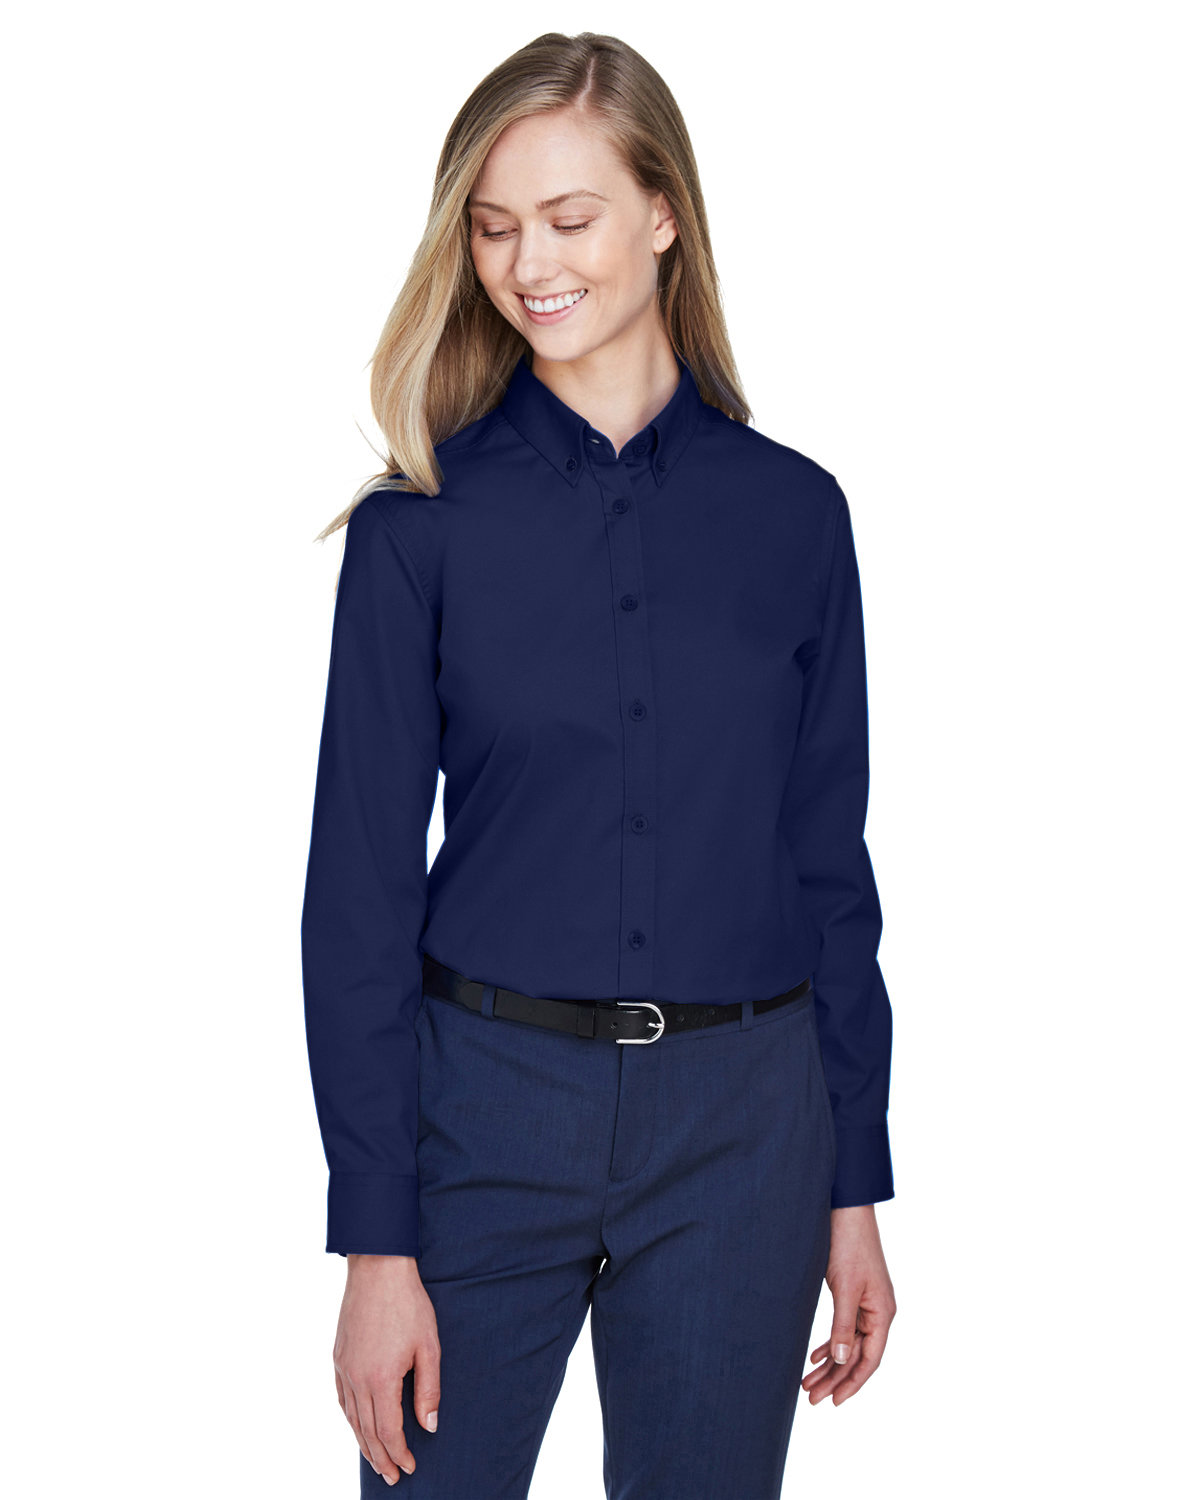 CORE365 Ladies' Operate Long-Sleeve Twill Shirt CLASSIC NAVY 